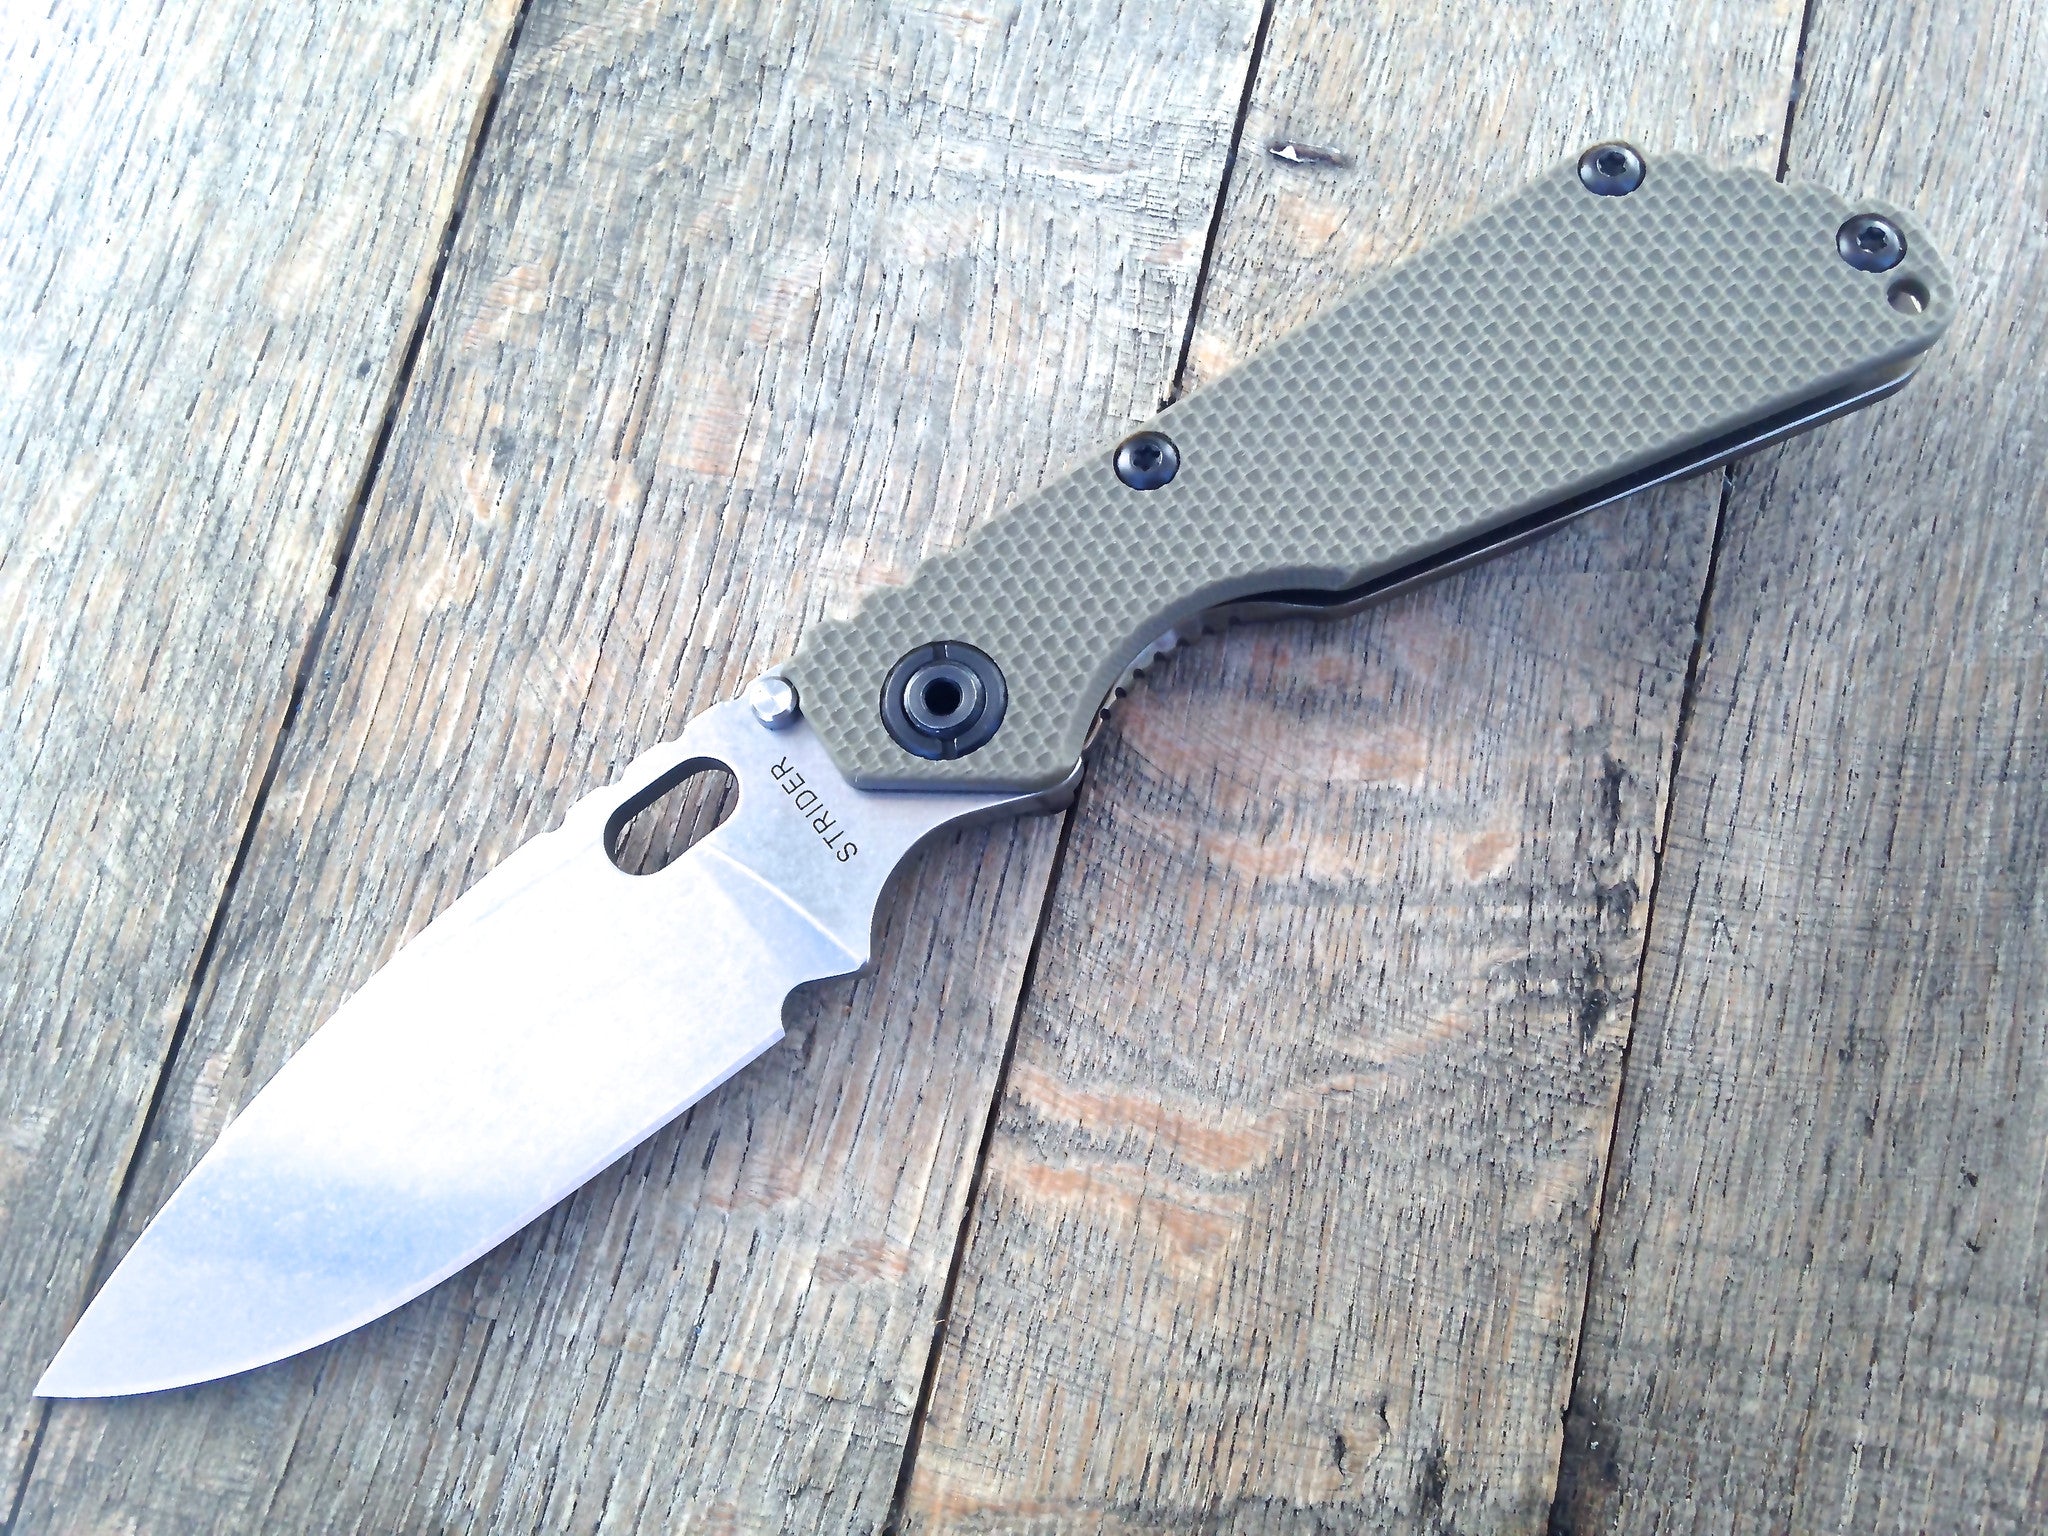 Strider SnG Green G-10 Flamed Ti (3.5" Stone Washed) - GearBarrel.com